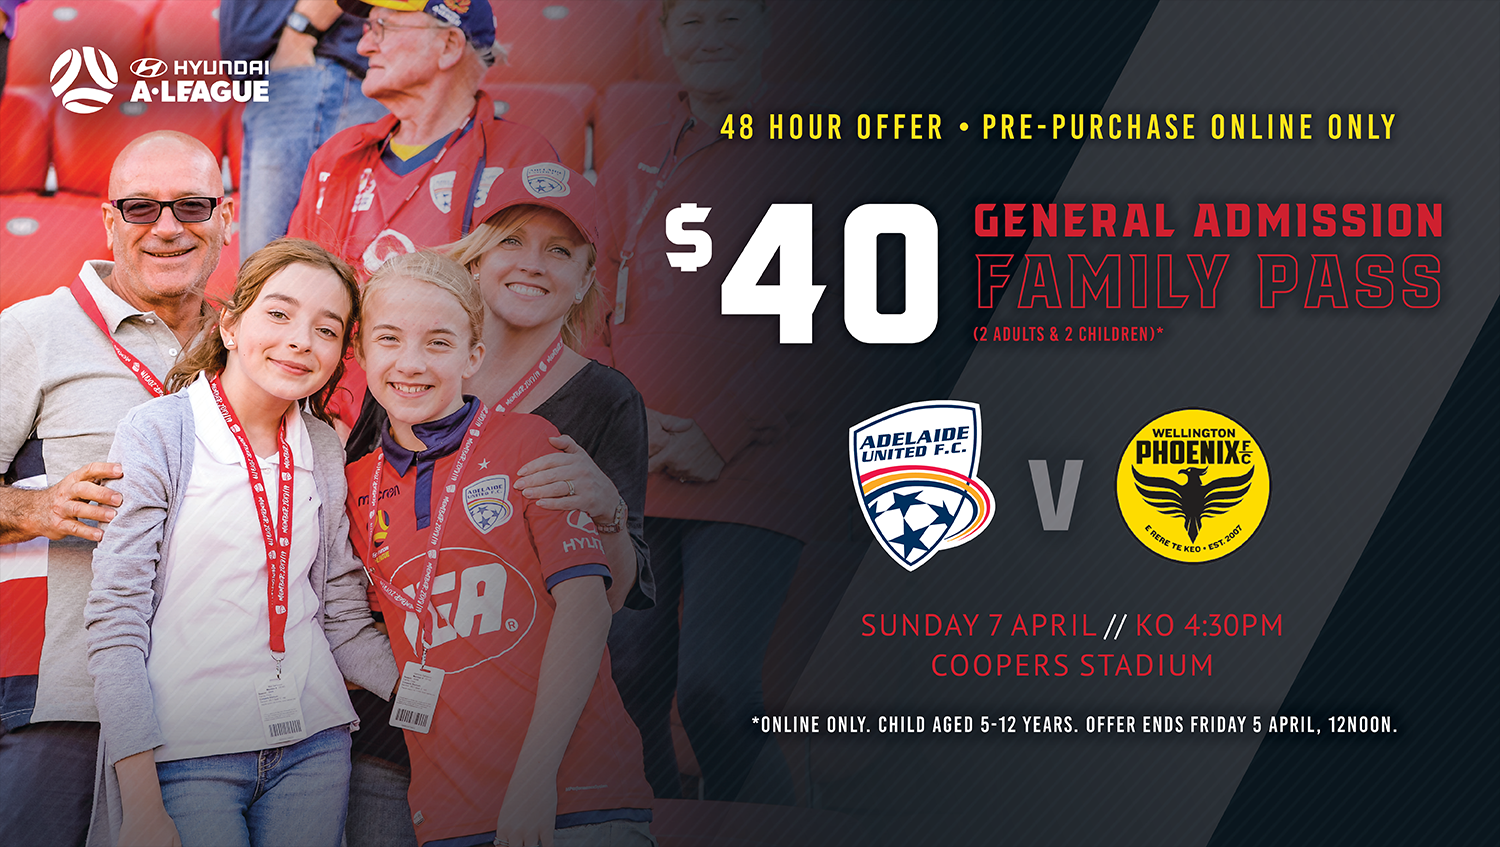 Adelaide United Family Tickets for 48 Hours! Ends 12pm, Friday 5 April